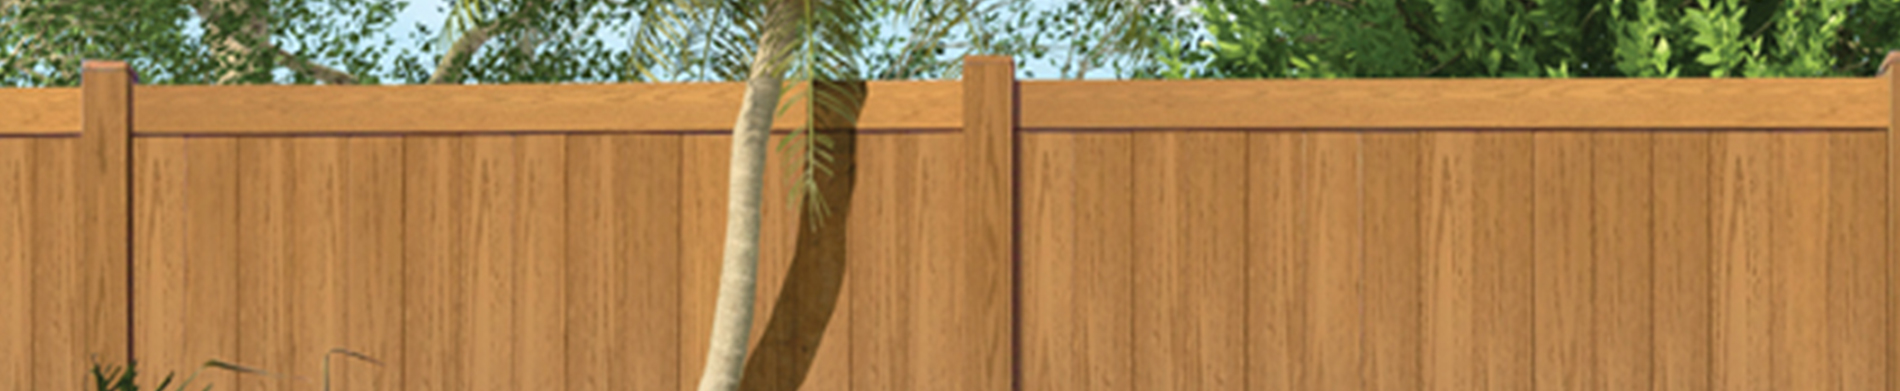 Choose Privacy Fence Panels to Level up Your Privacy and Security